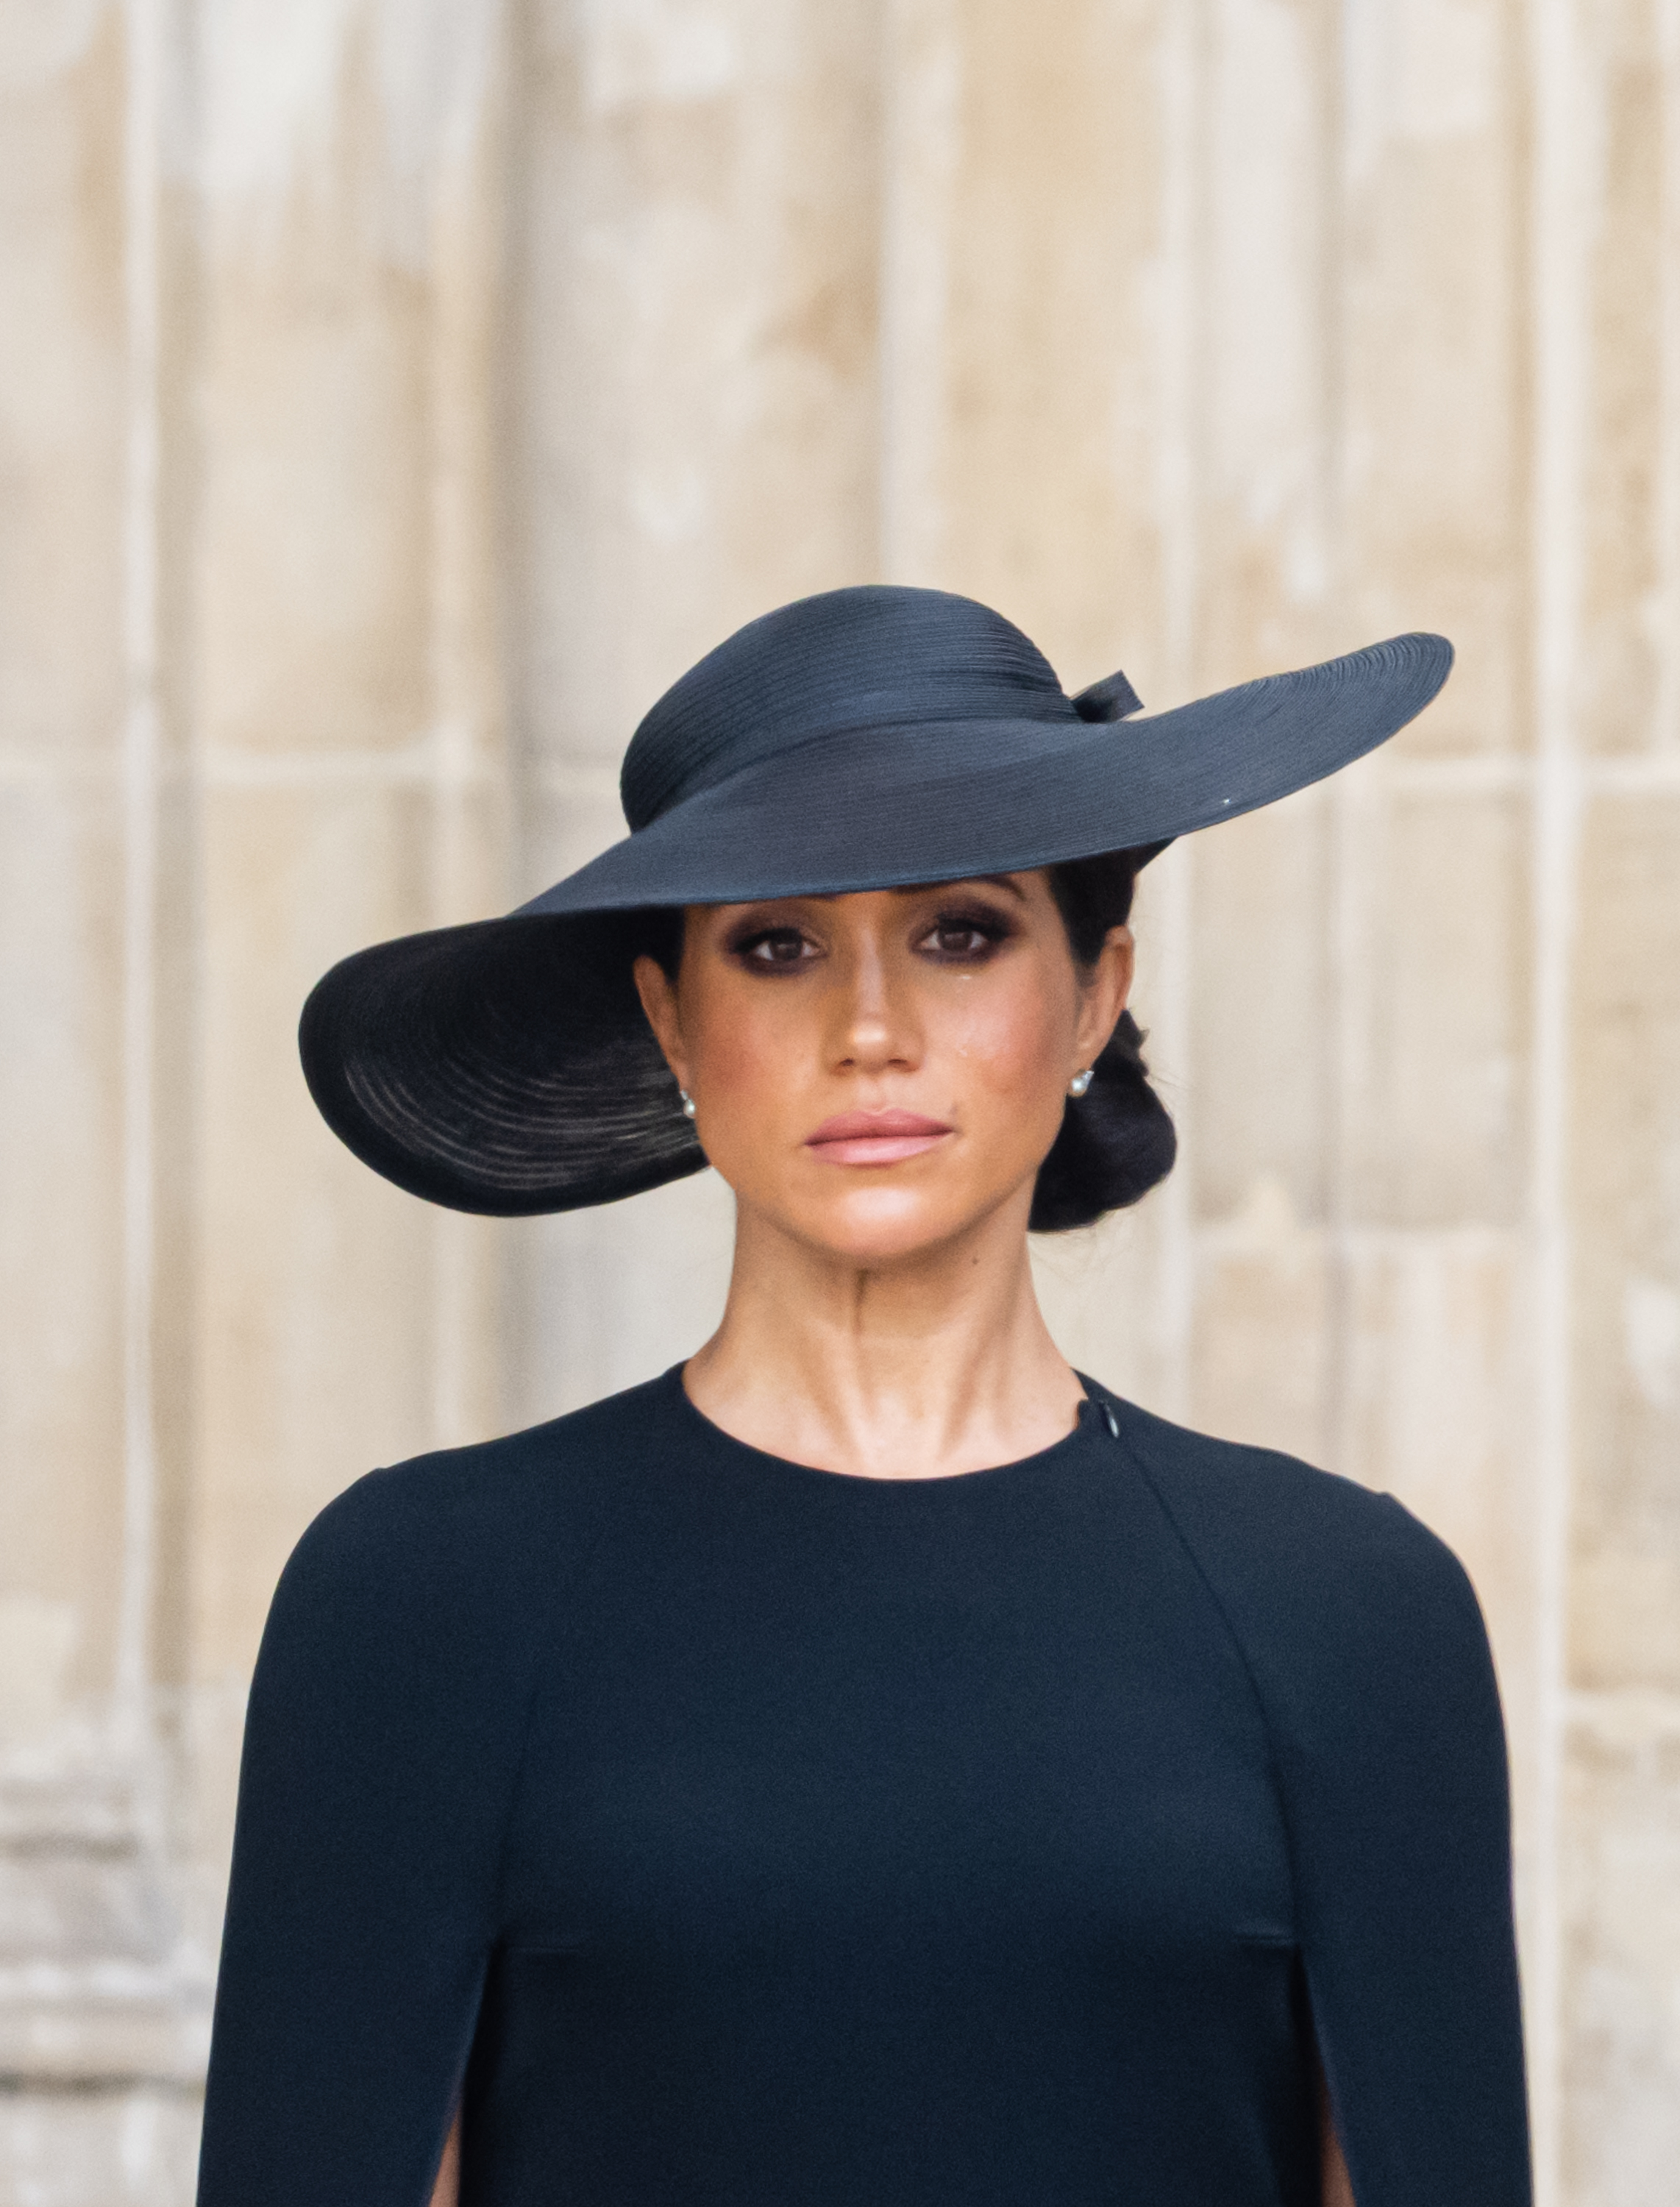 Meghan Markle at the State Funeral of Queen Elizabeth II at Westminster Abbey on September 19, 2022 in London, England | Source: Getty Images